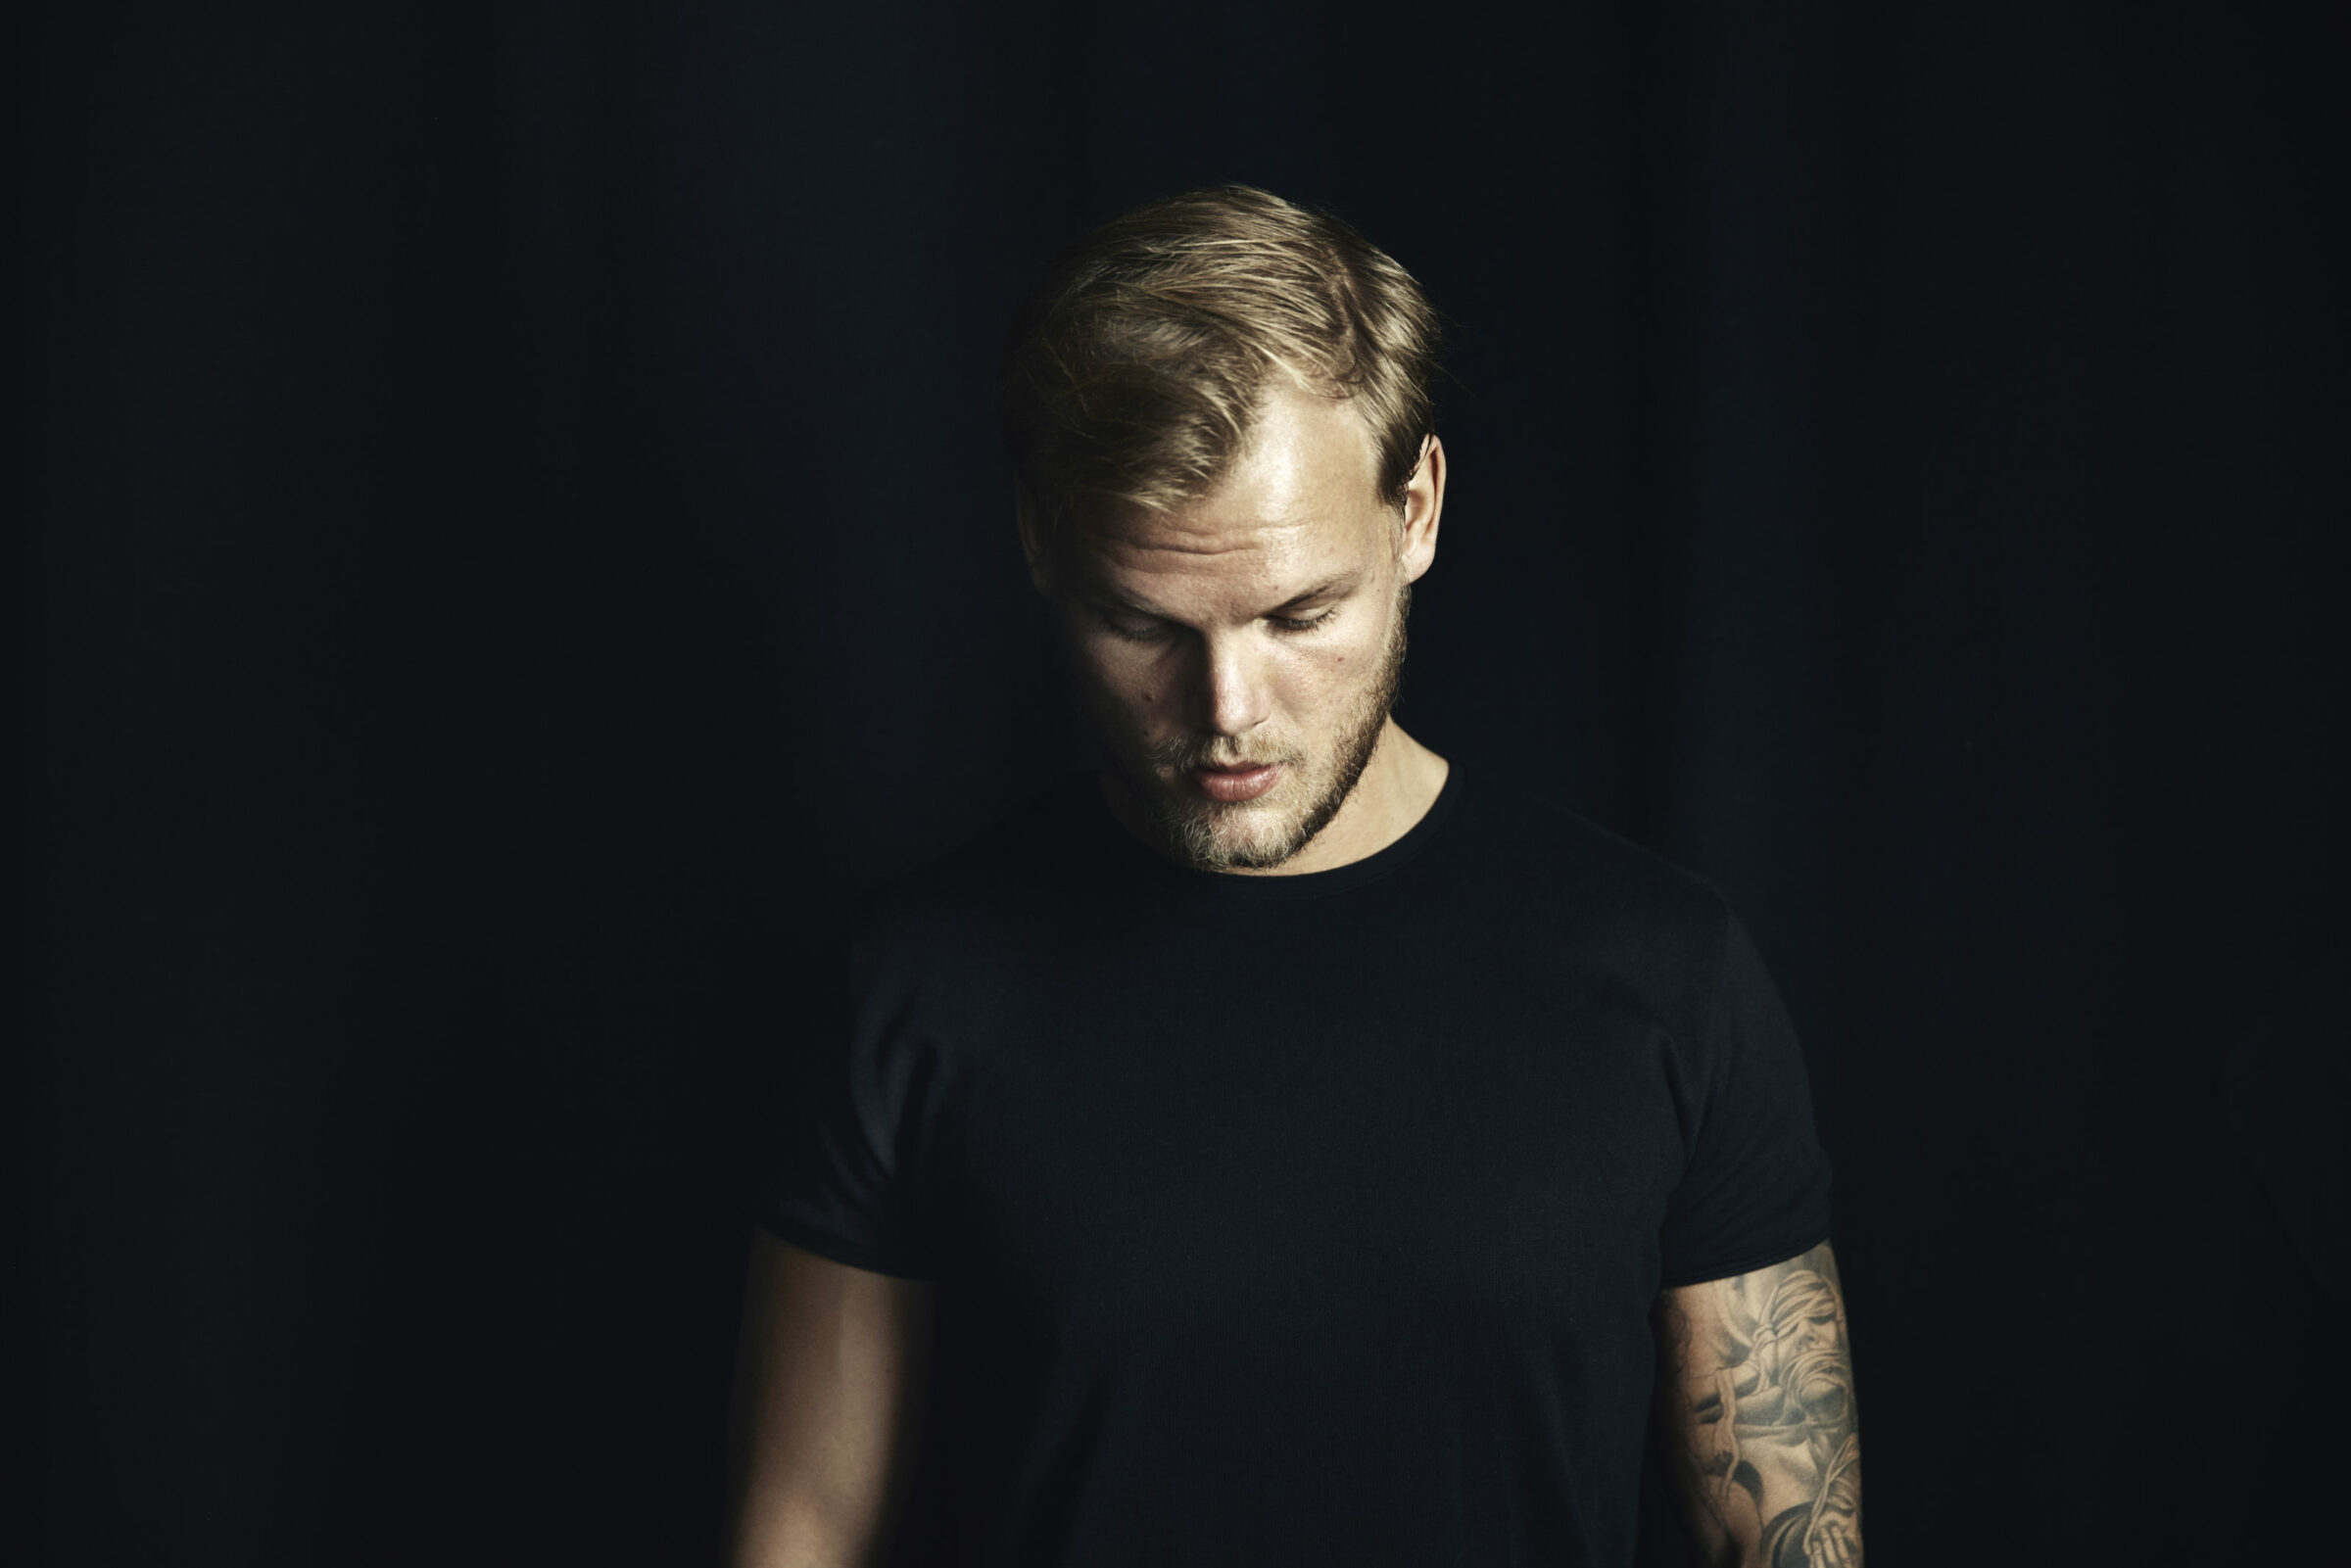 Today marks 5 years since the world lost Avicii